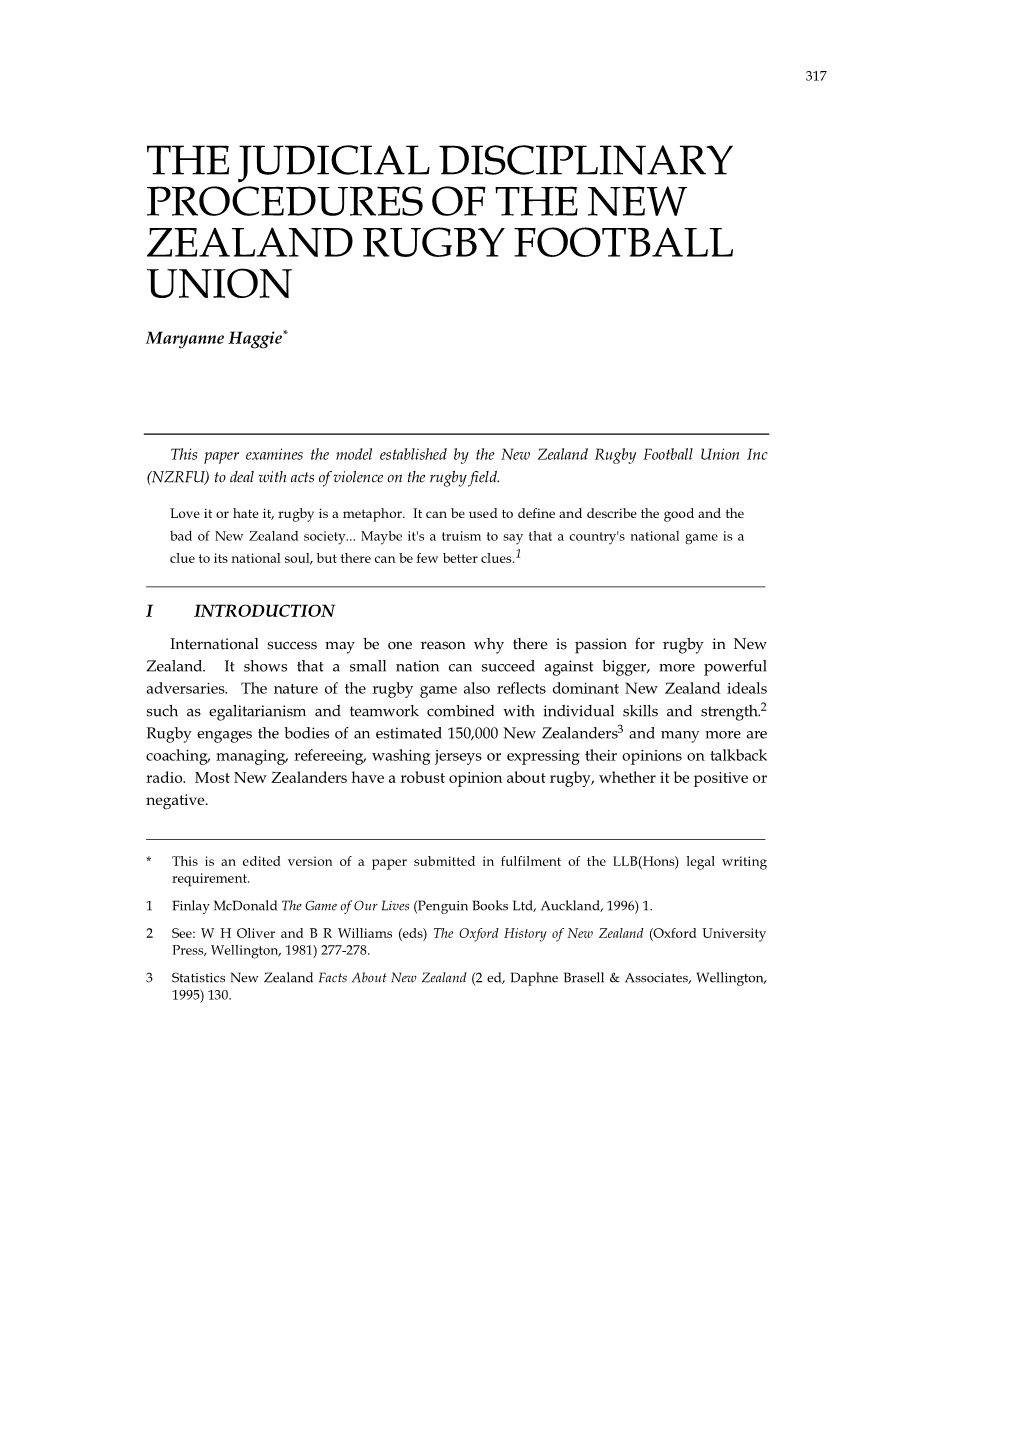 The Judicial Disciplinary Procedures of the New Zealand Rugby Football Union